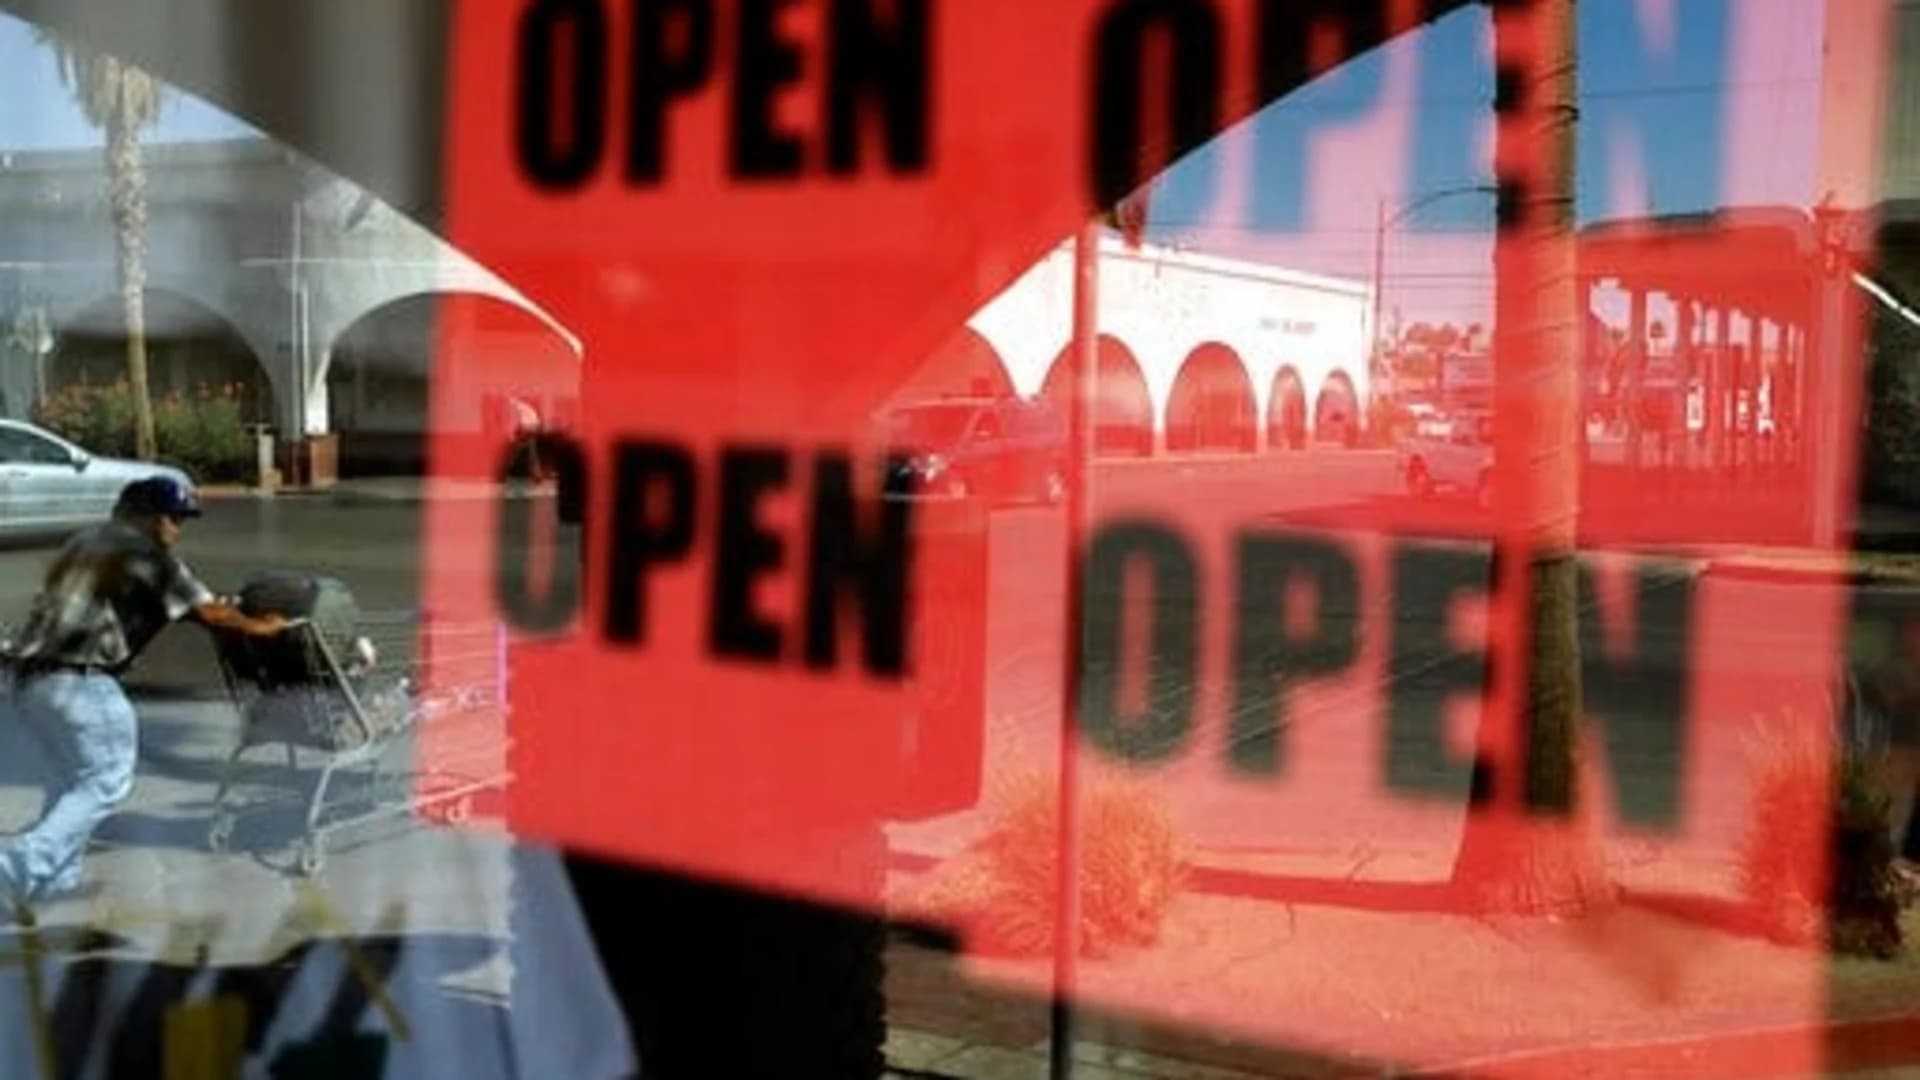 'We're Open' - Featuring the recovery of local businesses, August 28, 2020